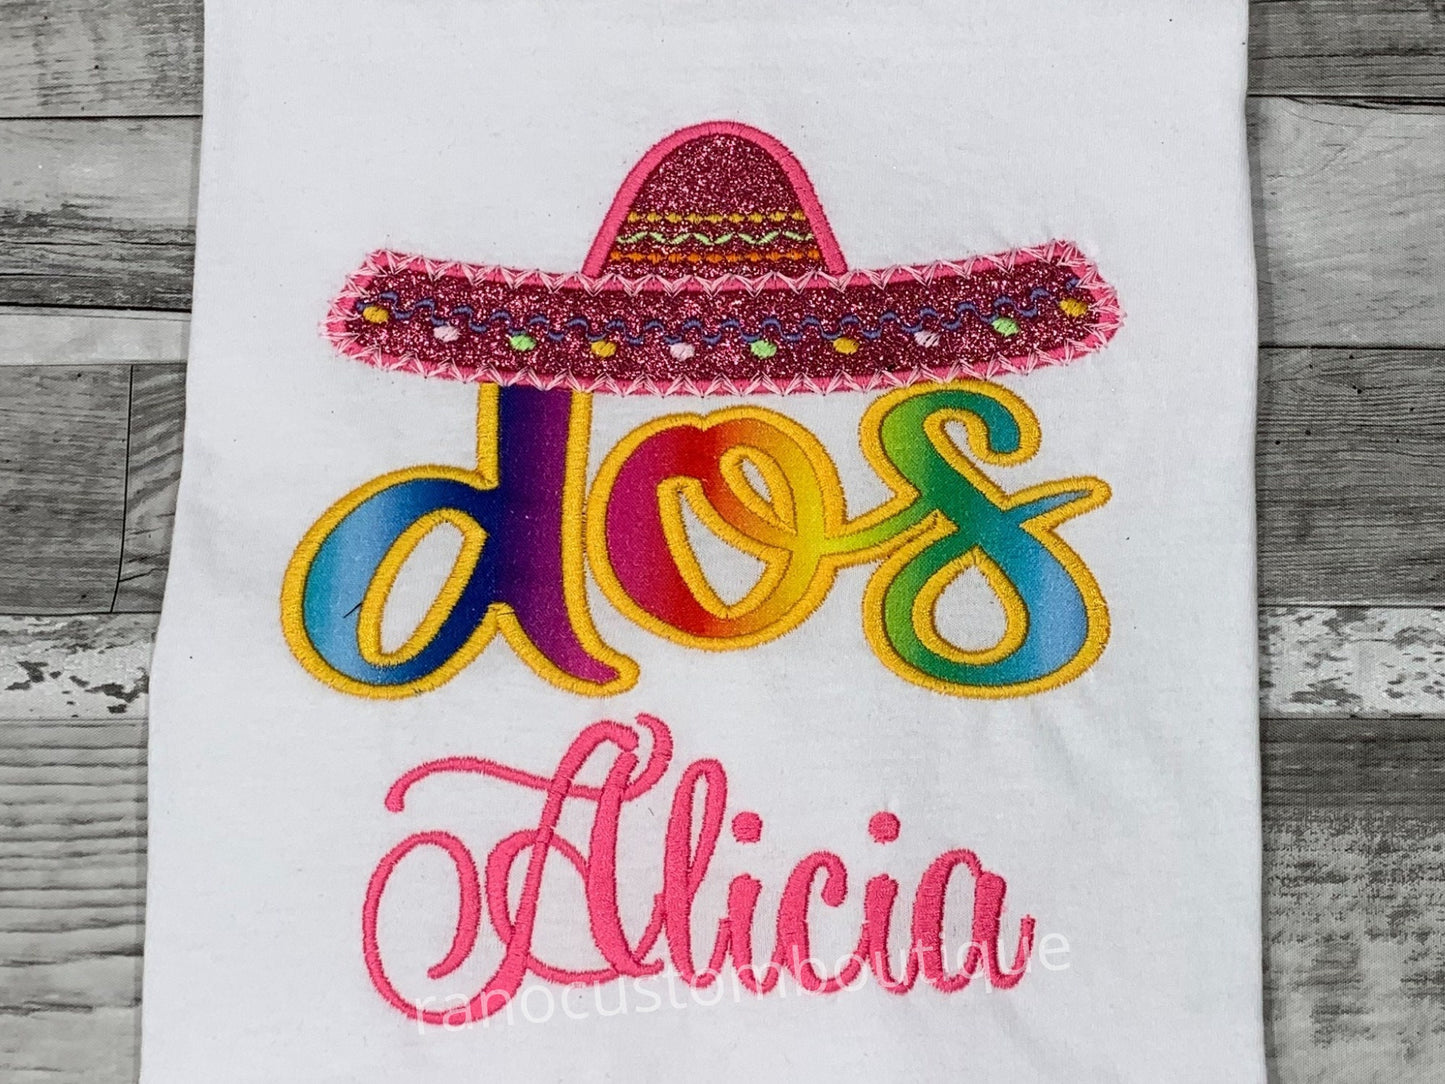 Personalized Pink Sombrero Girls T-Shirts, Custom Girls Bodysuit, Embroidered Fiesta Party Birthday Shirts, Embroidered  Name Design